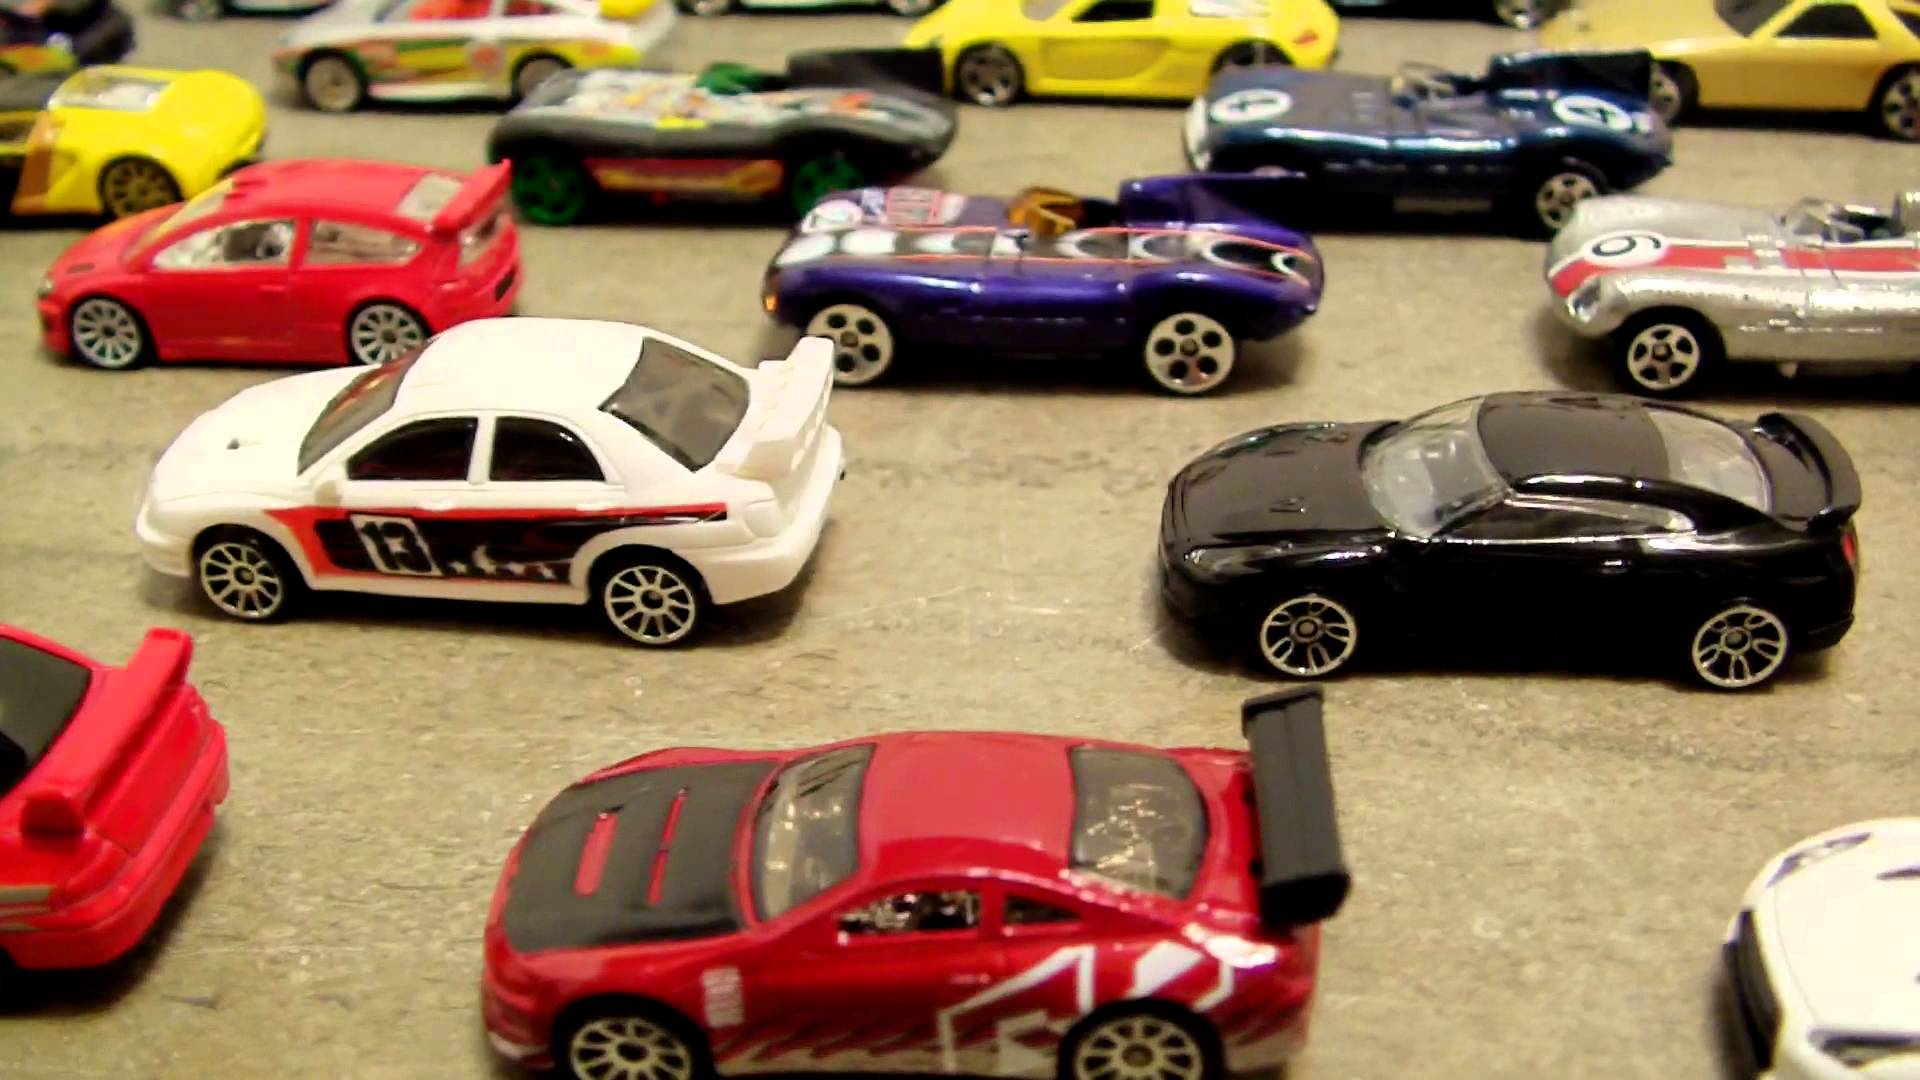 Hot Wheels Assorted collection of cars - YouTube